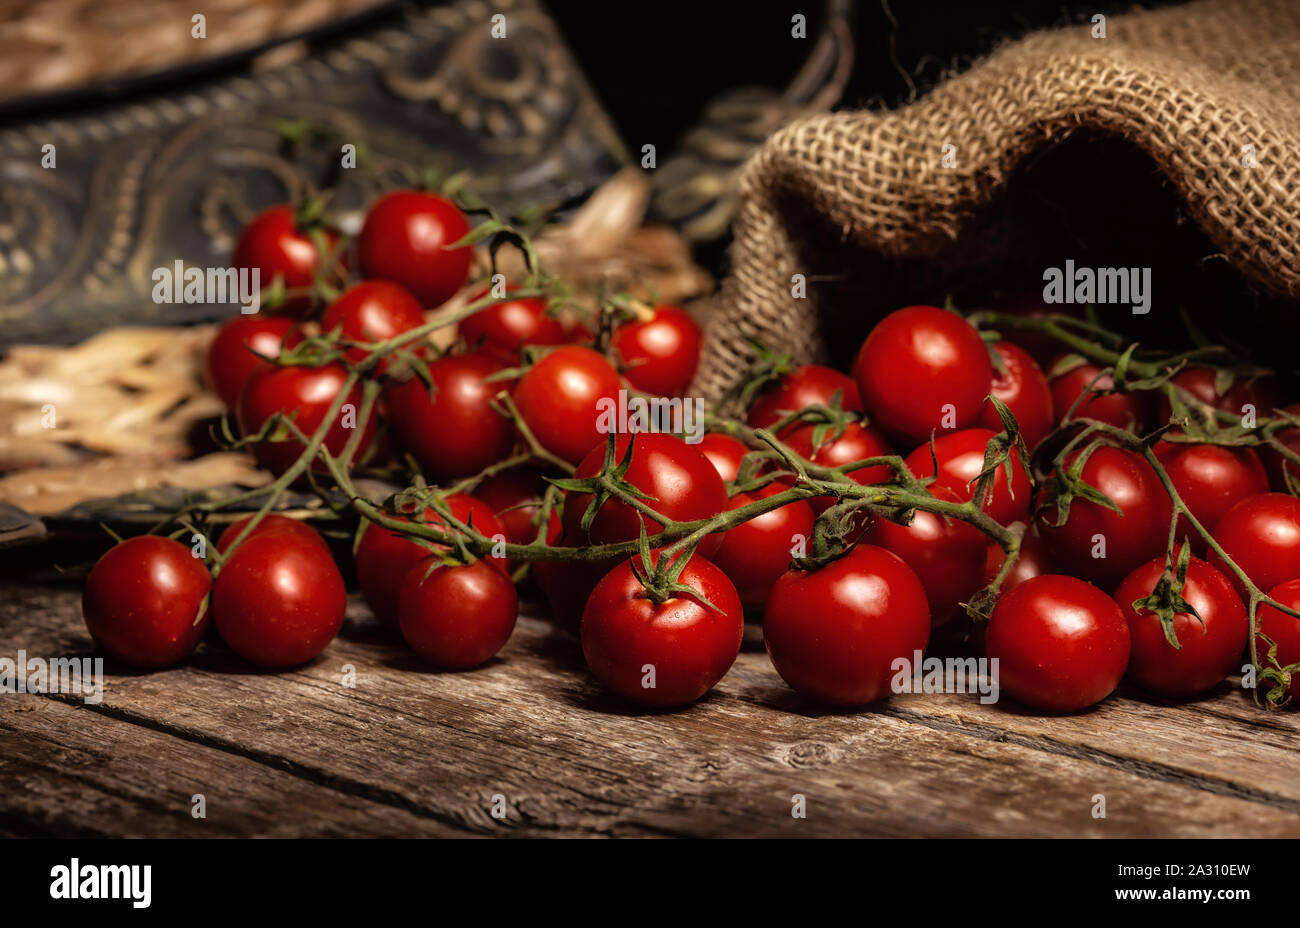 Still life of cherry tomatoes on wooden rustic table with jute sack. Stock Photo